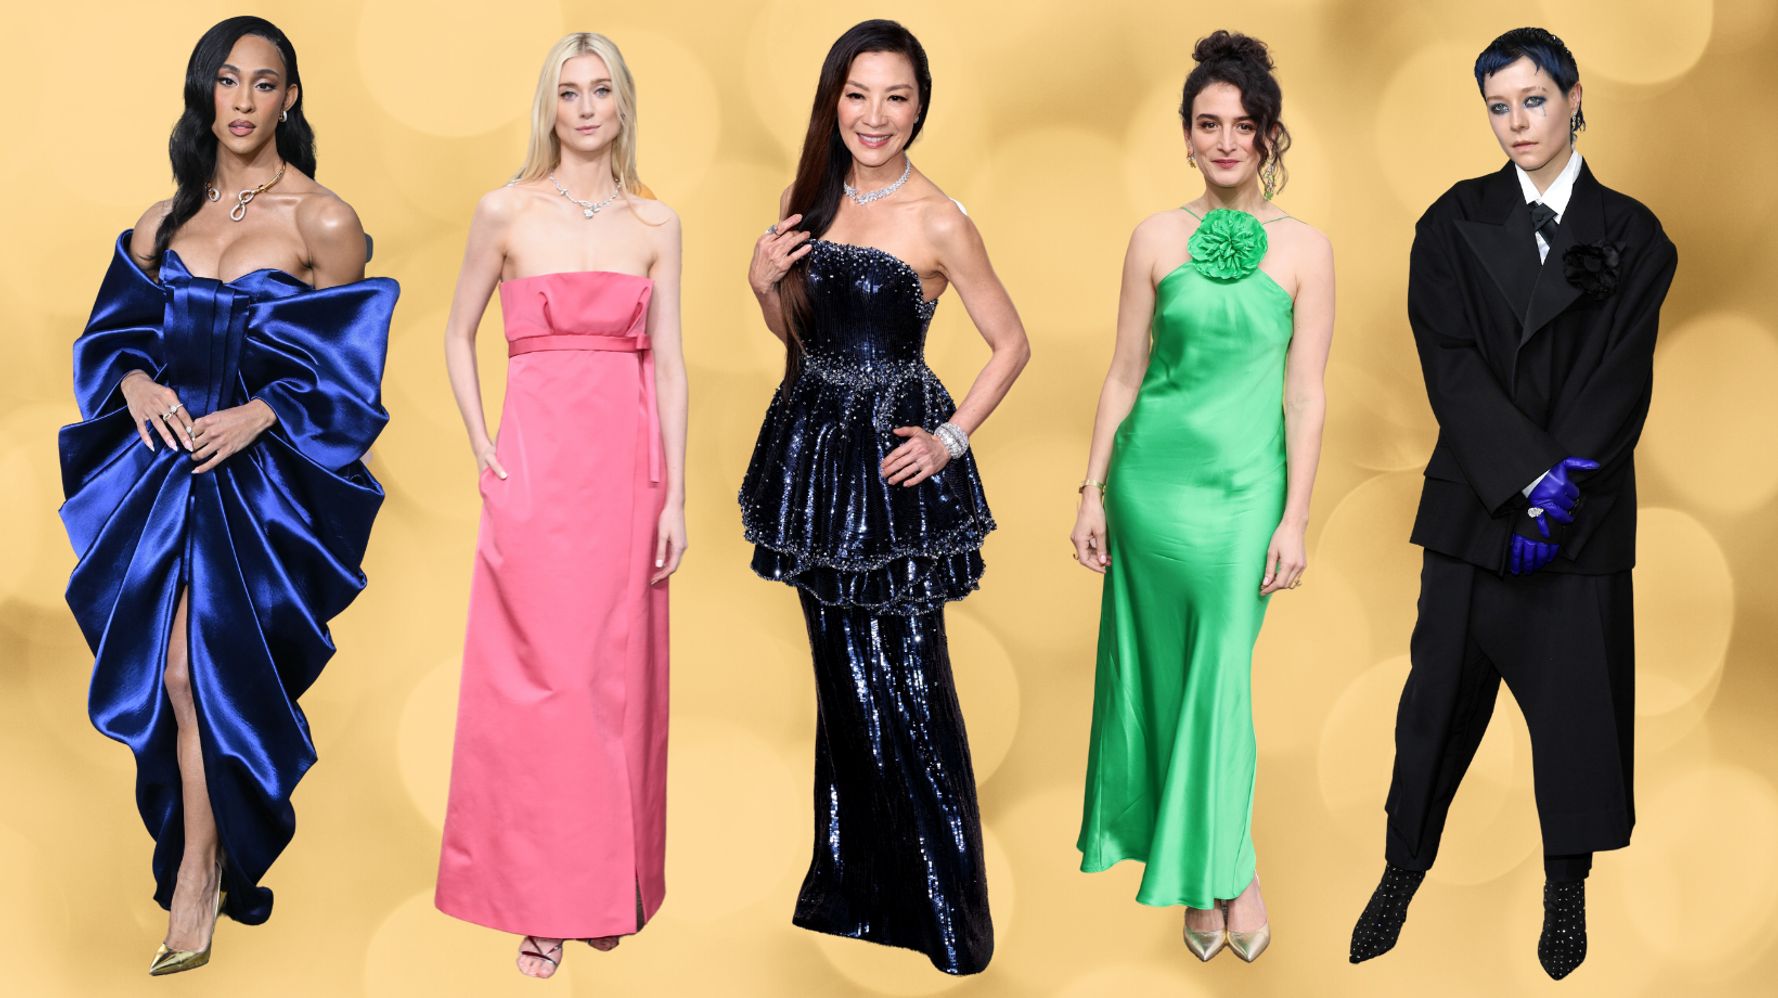 Red-and-Pink Color Blocking Makes an Unlikely Comeback at the Emmys